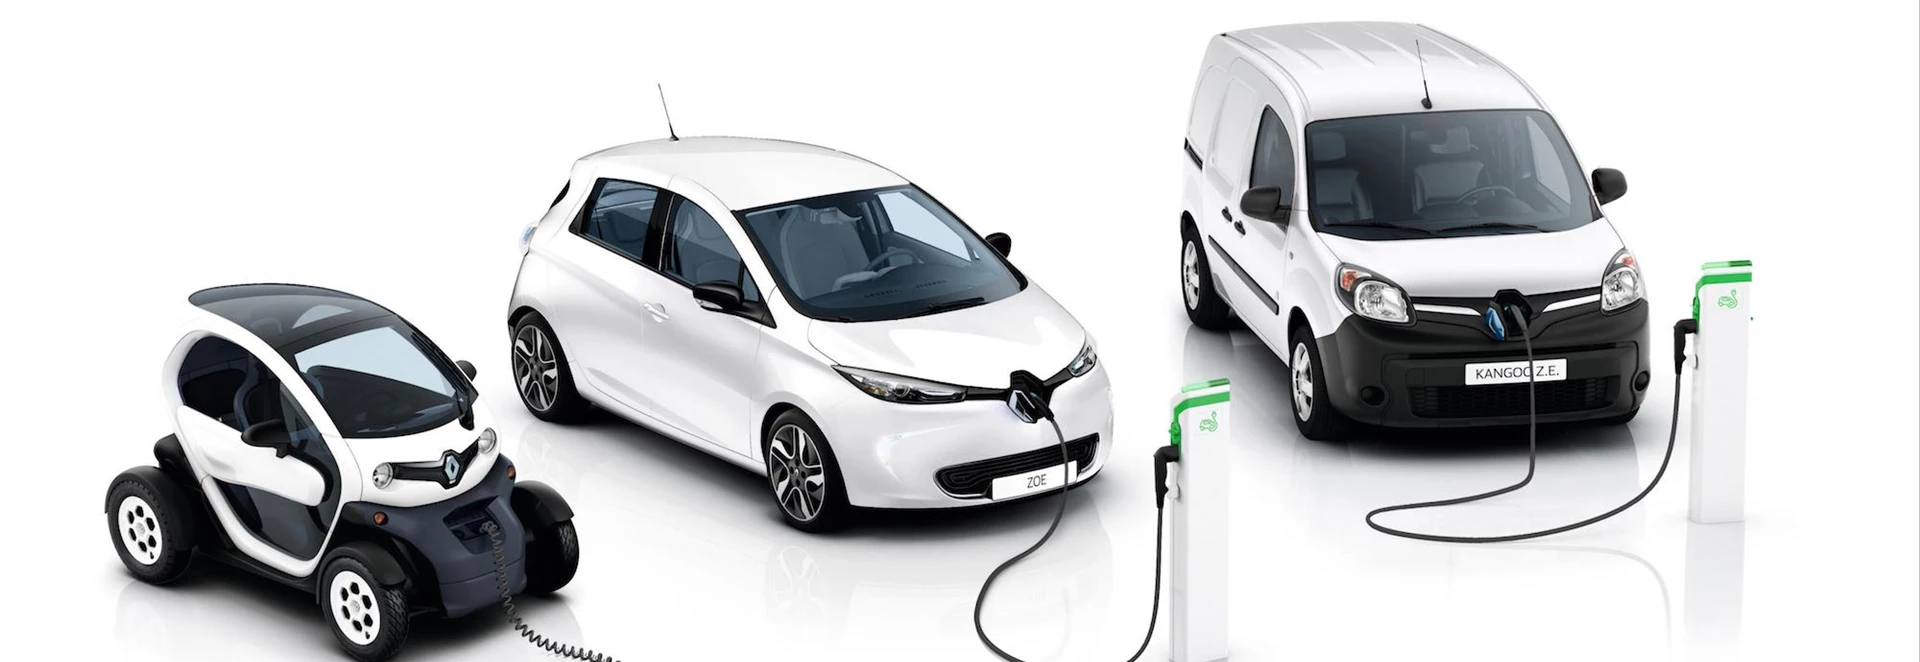 Renault awarded ‘Electric Vehicle Manufacturer of the Year’